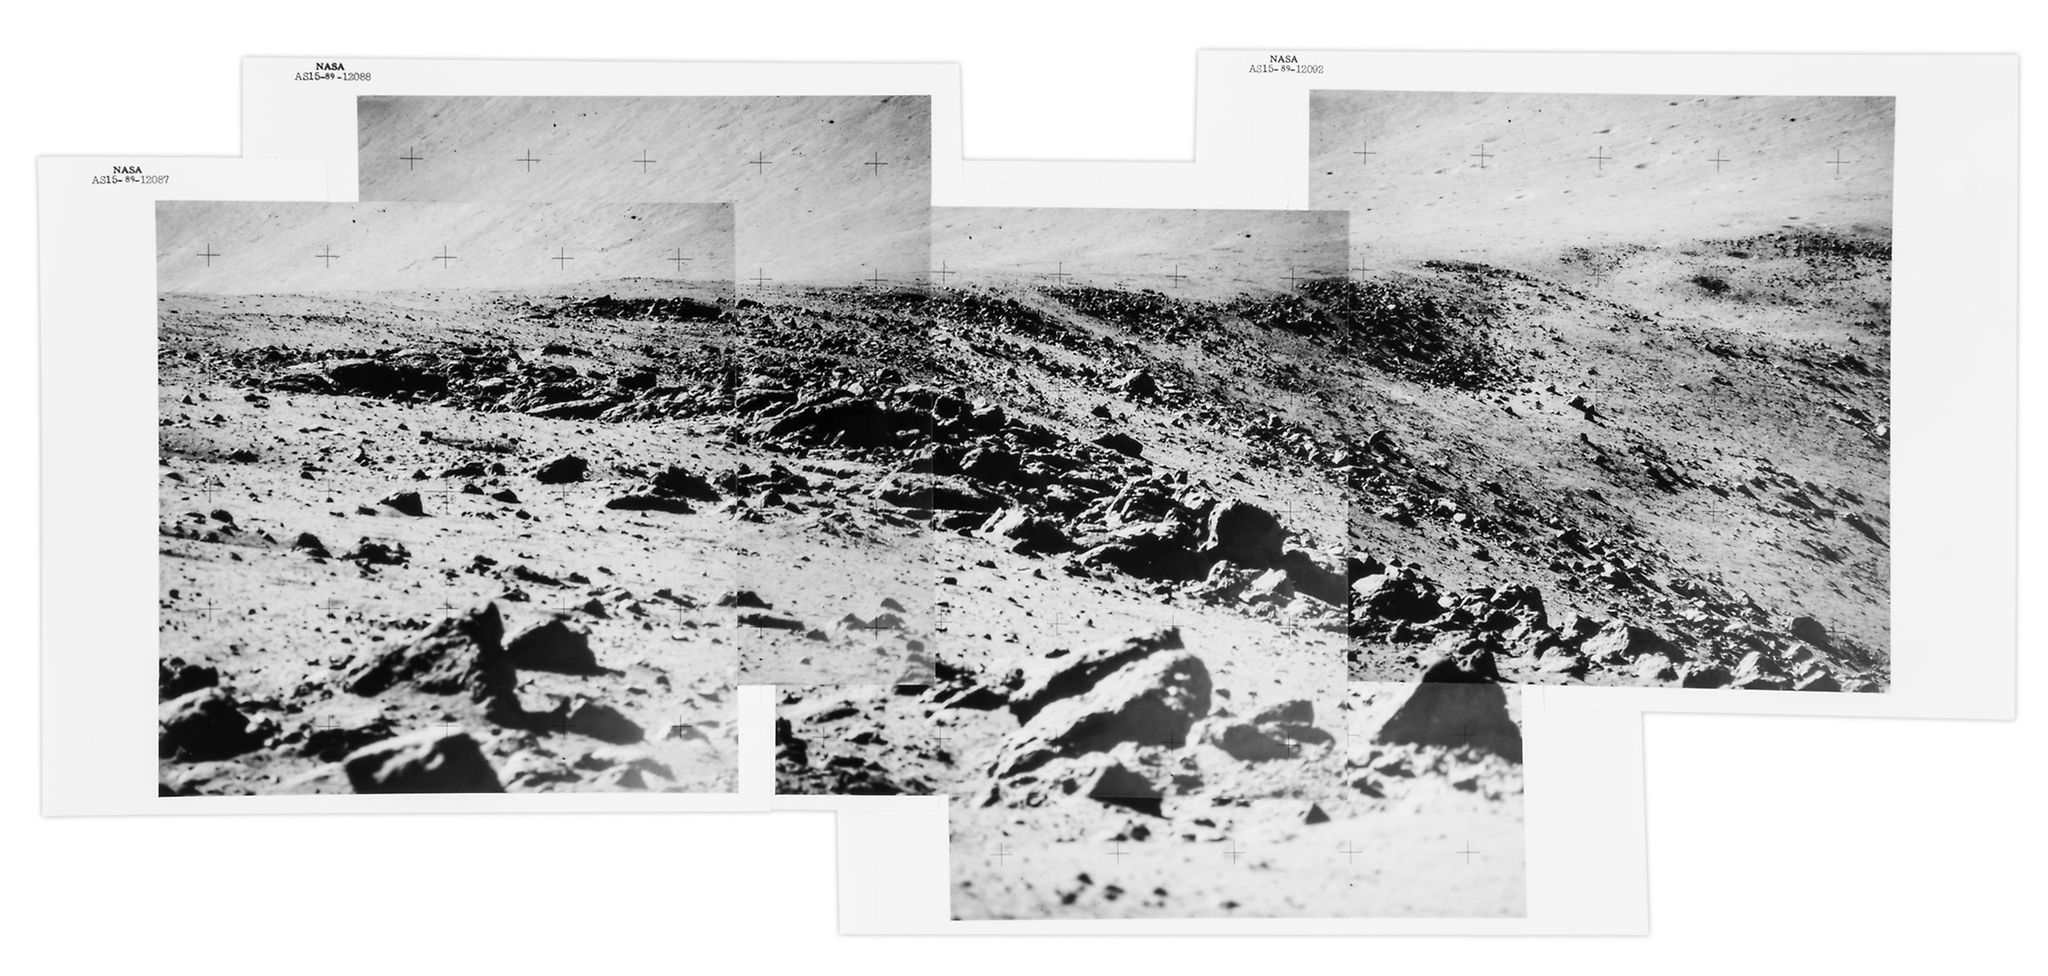 Telephoto panorama of Hadley Rille’s East Wall below Mount Hadley Delta Telephoto panorama of Hadley